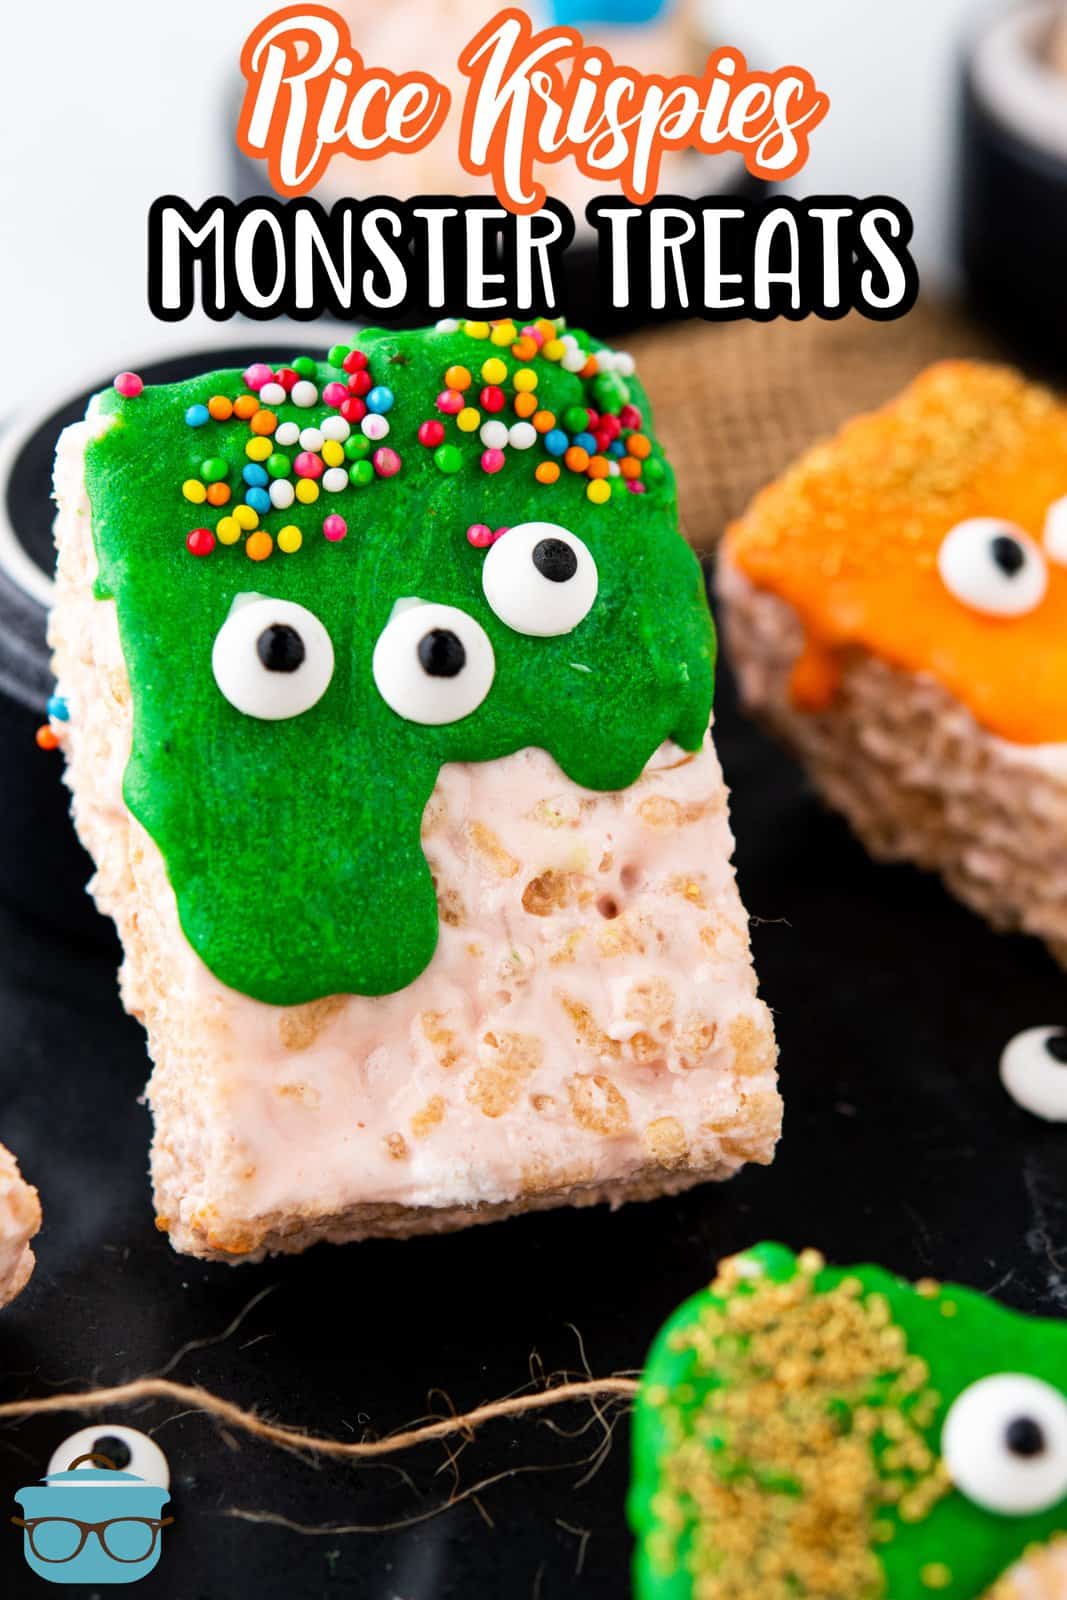 Pinterest image close up of one of the Halloween Rice Krispies Monsters.